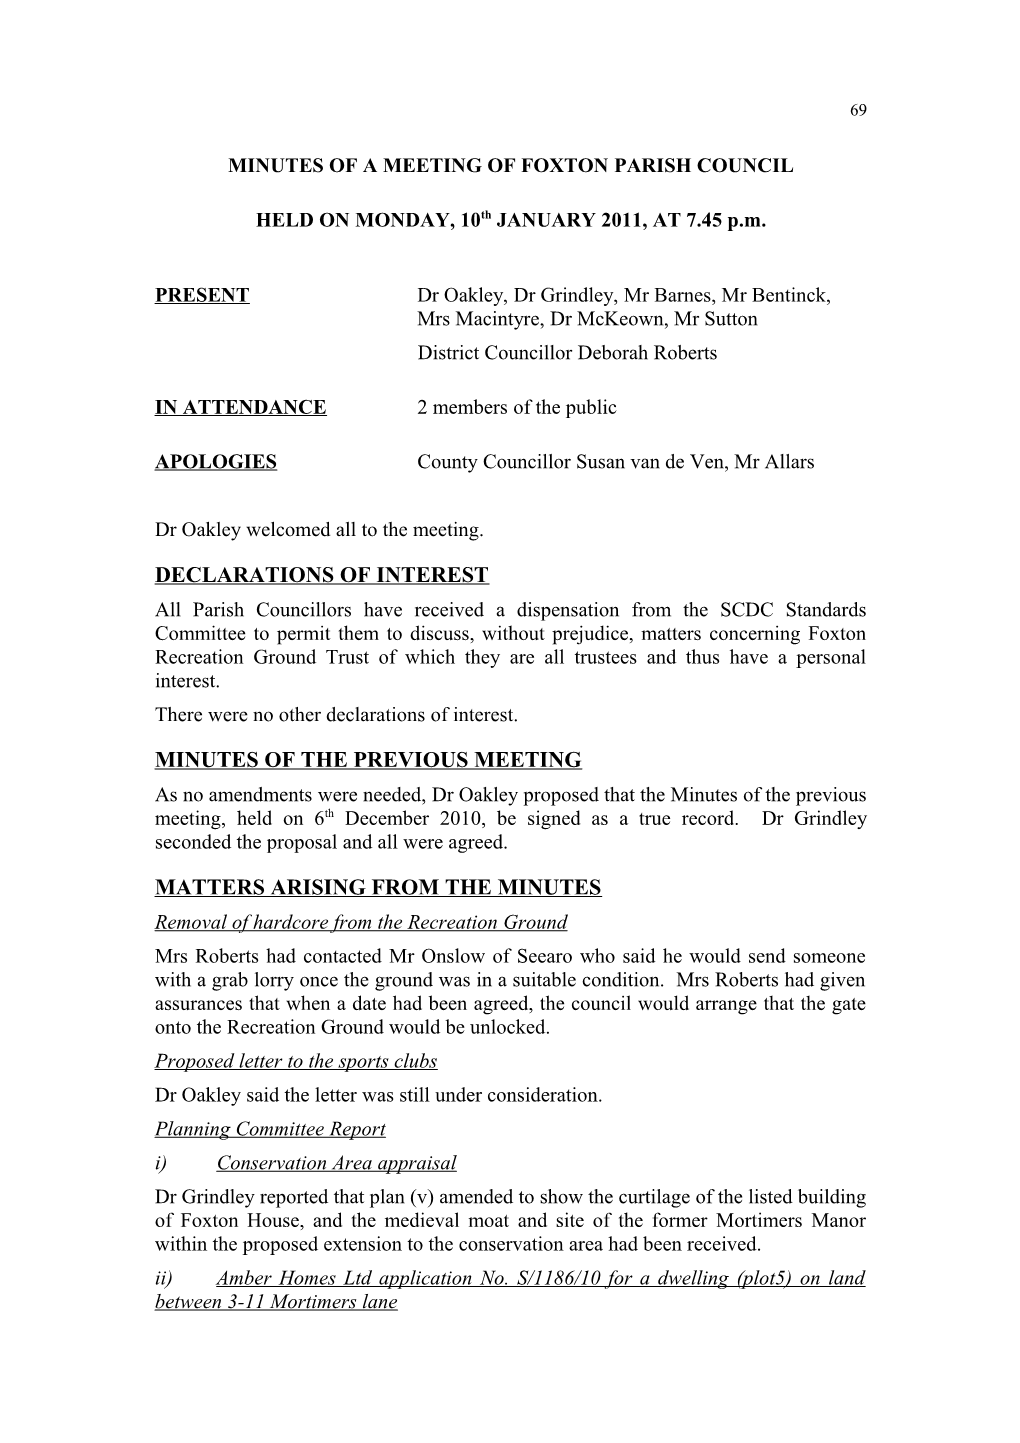 Minutes of a Meeting of Foxton Parish Council s2